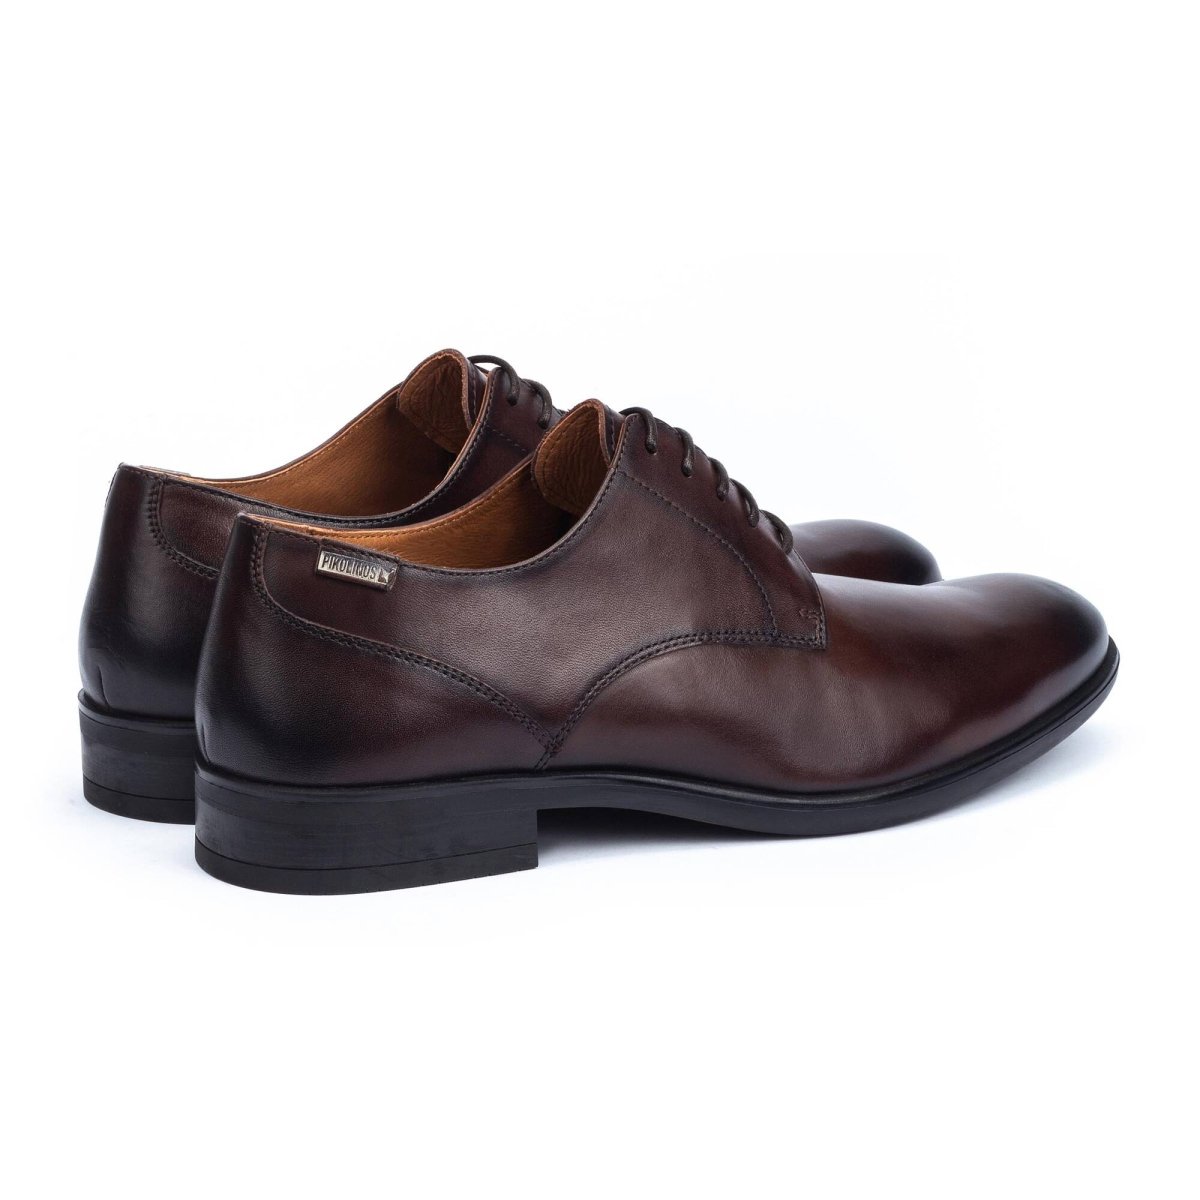 PIKOLINOS BRISTOL M7J-4187 MEN'S LACE-UP SHOES IN OLMO - TLW Shoes